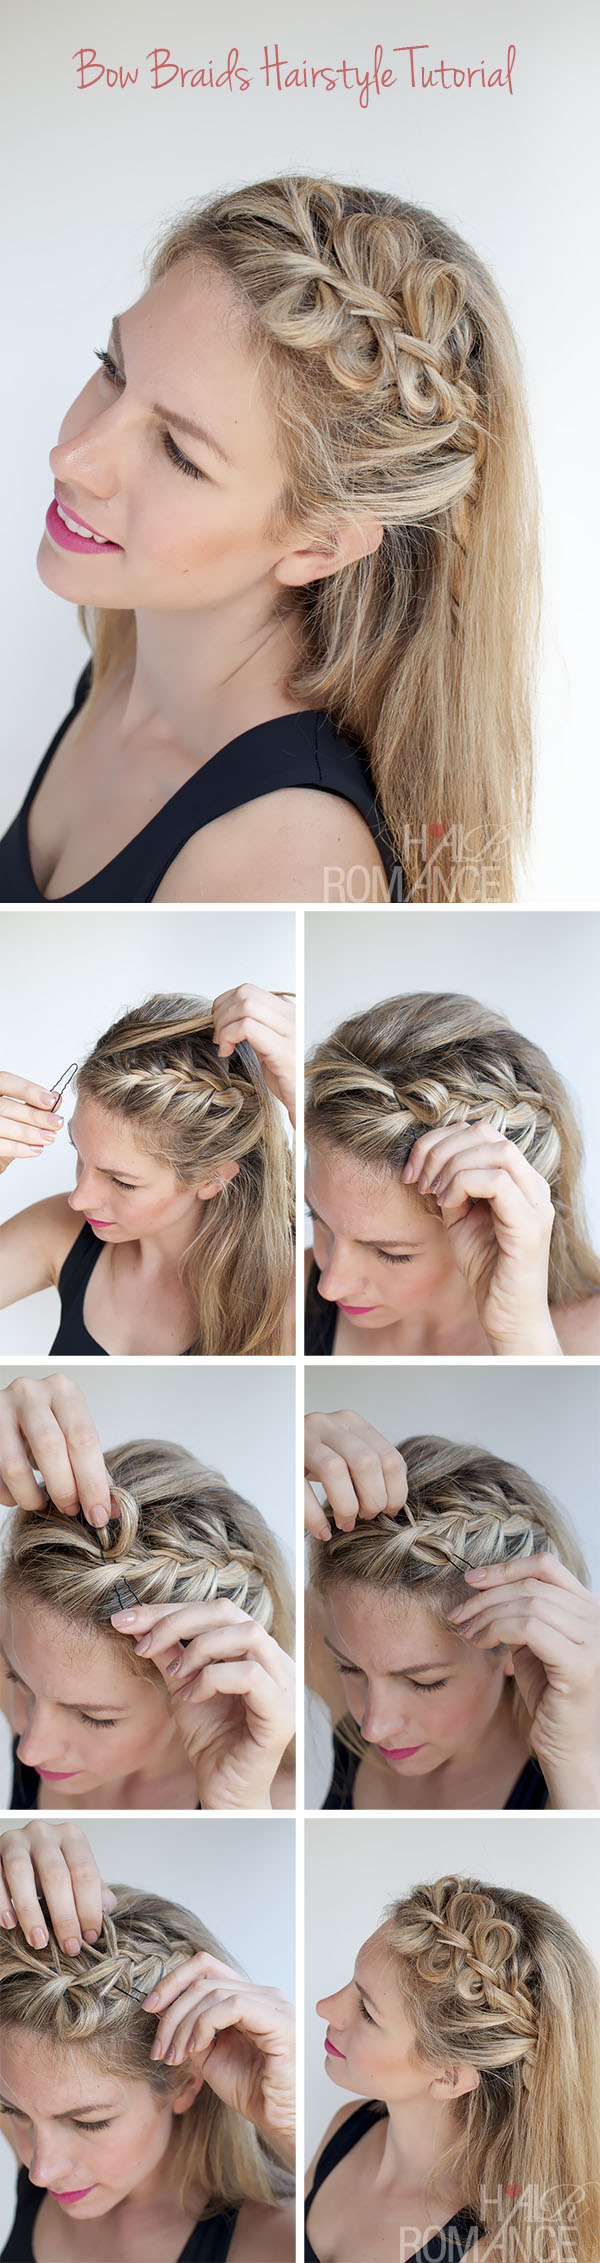 Bow Braids Hairstyle